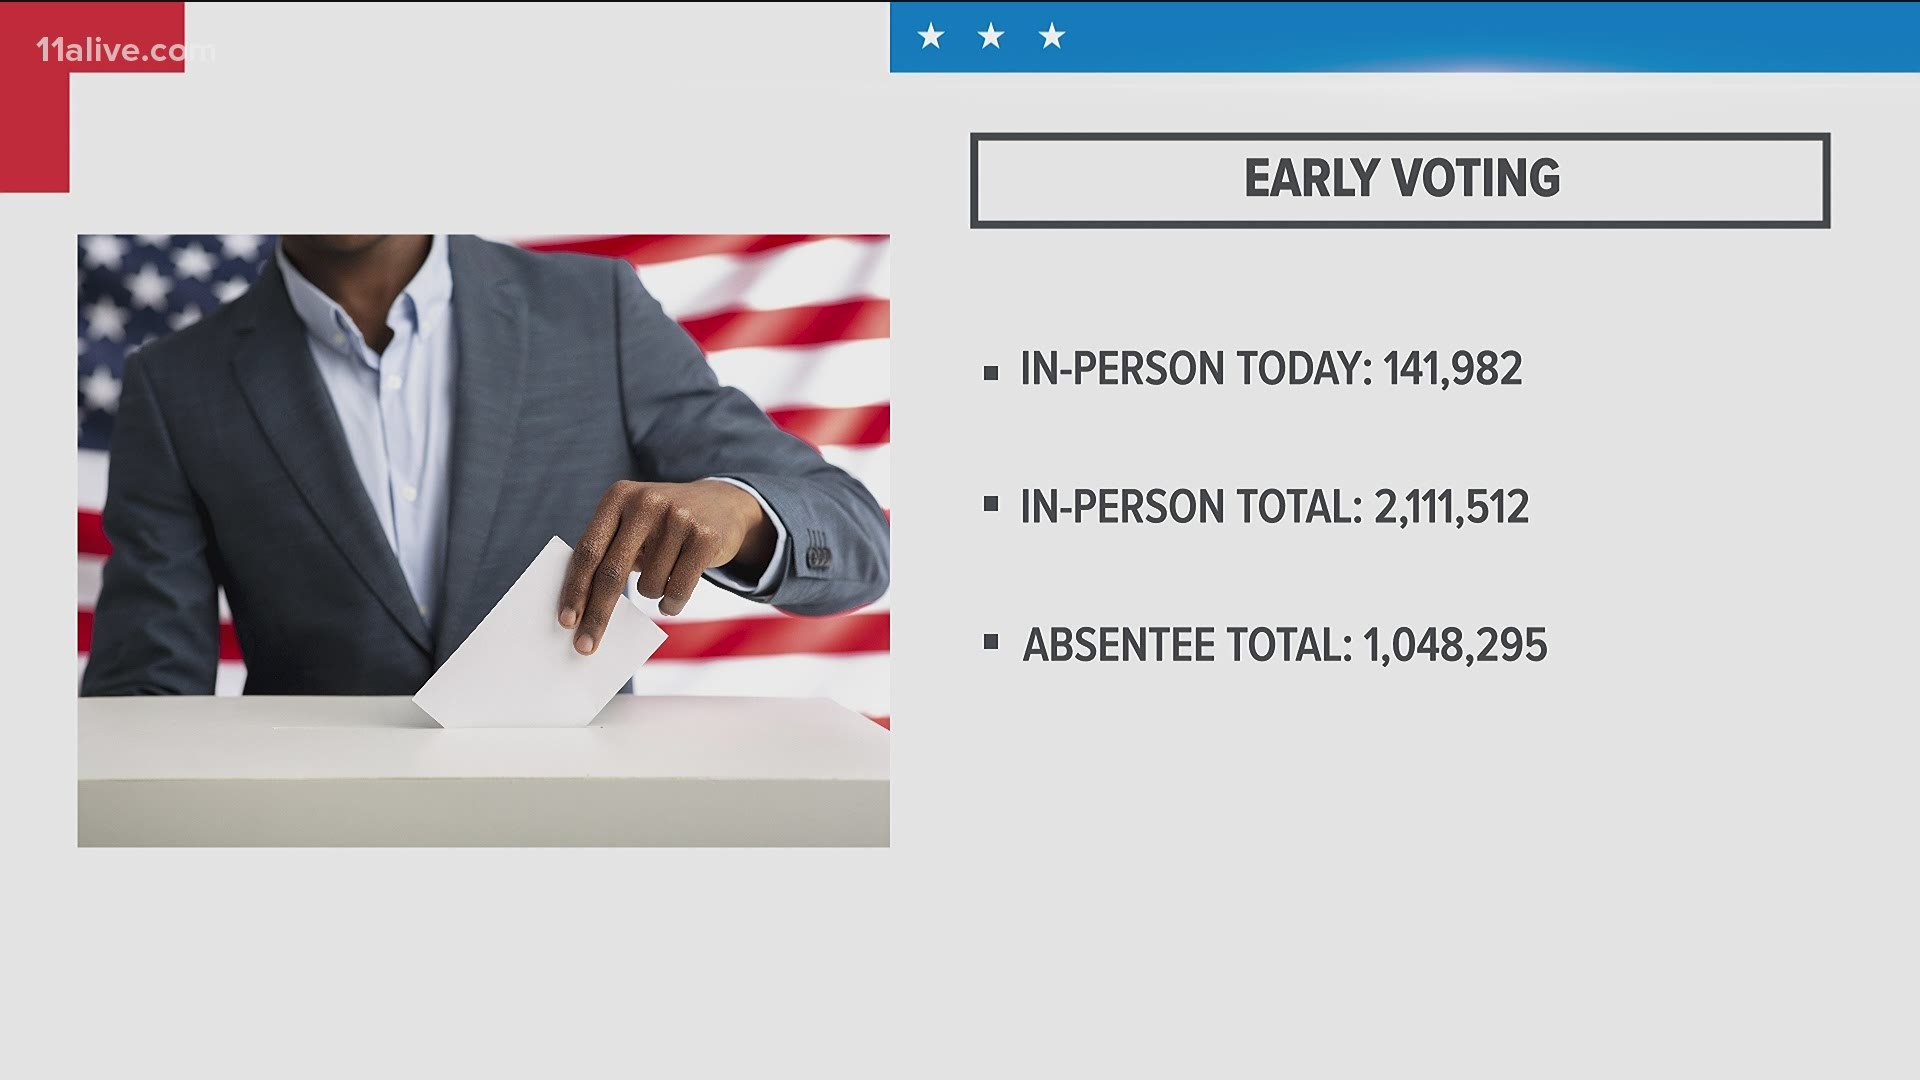 Georgia surpassed 3 million votes for the November general election in early voting on Tuesday, with one week to go until Election Day.